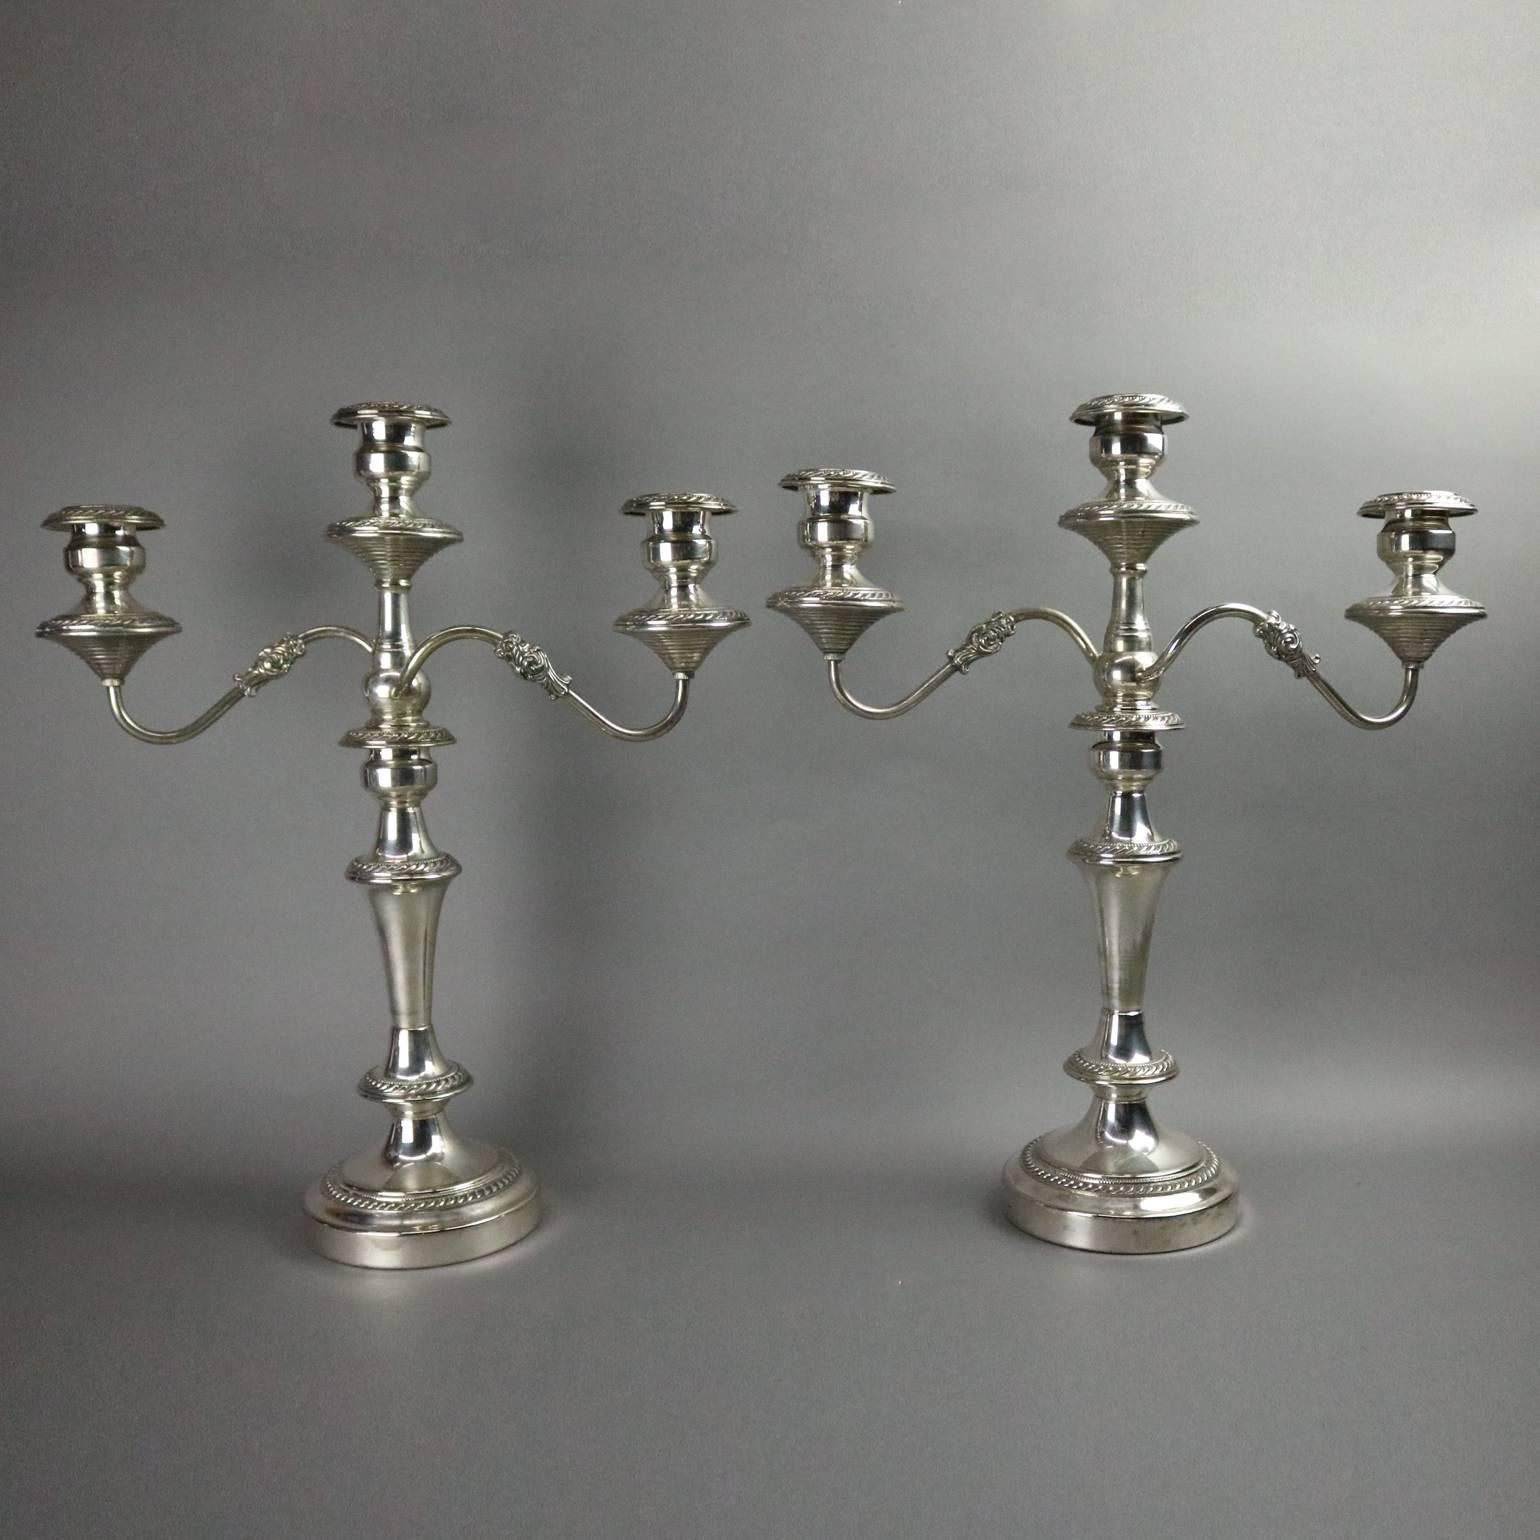 Antique set of three silver plate on copper three-light candelabra, circa 1880.

***DELIVERY NOTICE – Due to COVID-19 we are employing NO-CONTACT PRACTICES in the transfer of purchased items.  Additionally, for those who prefer to delay